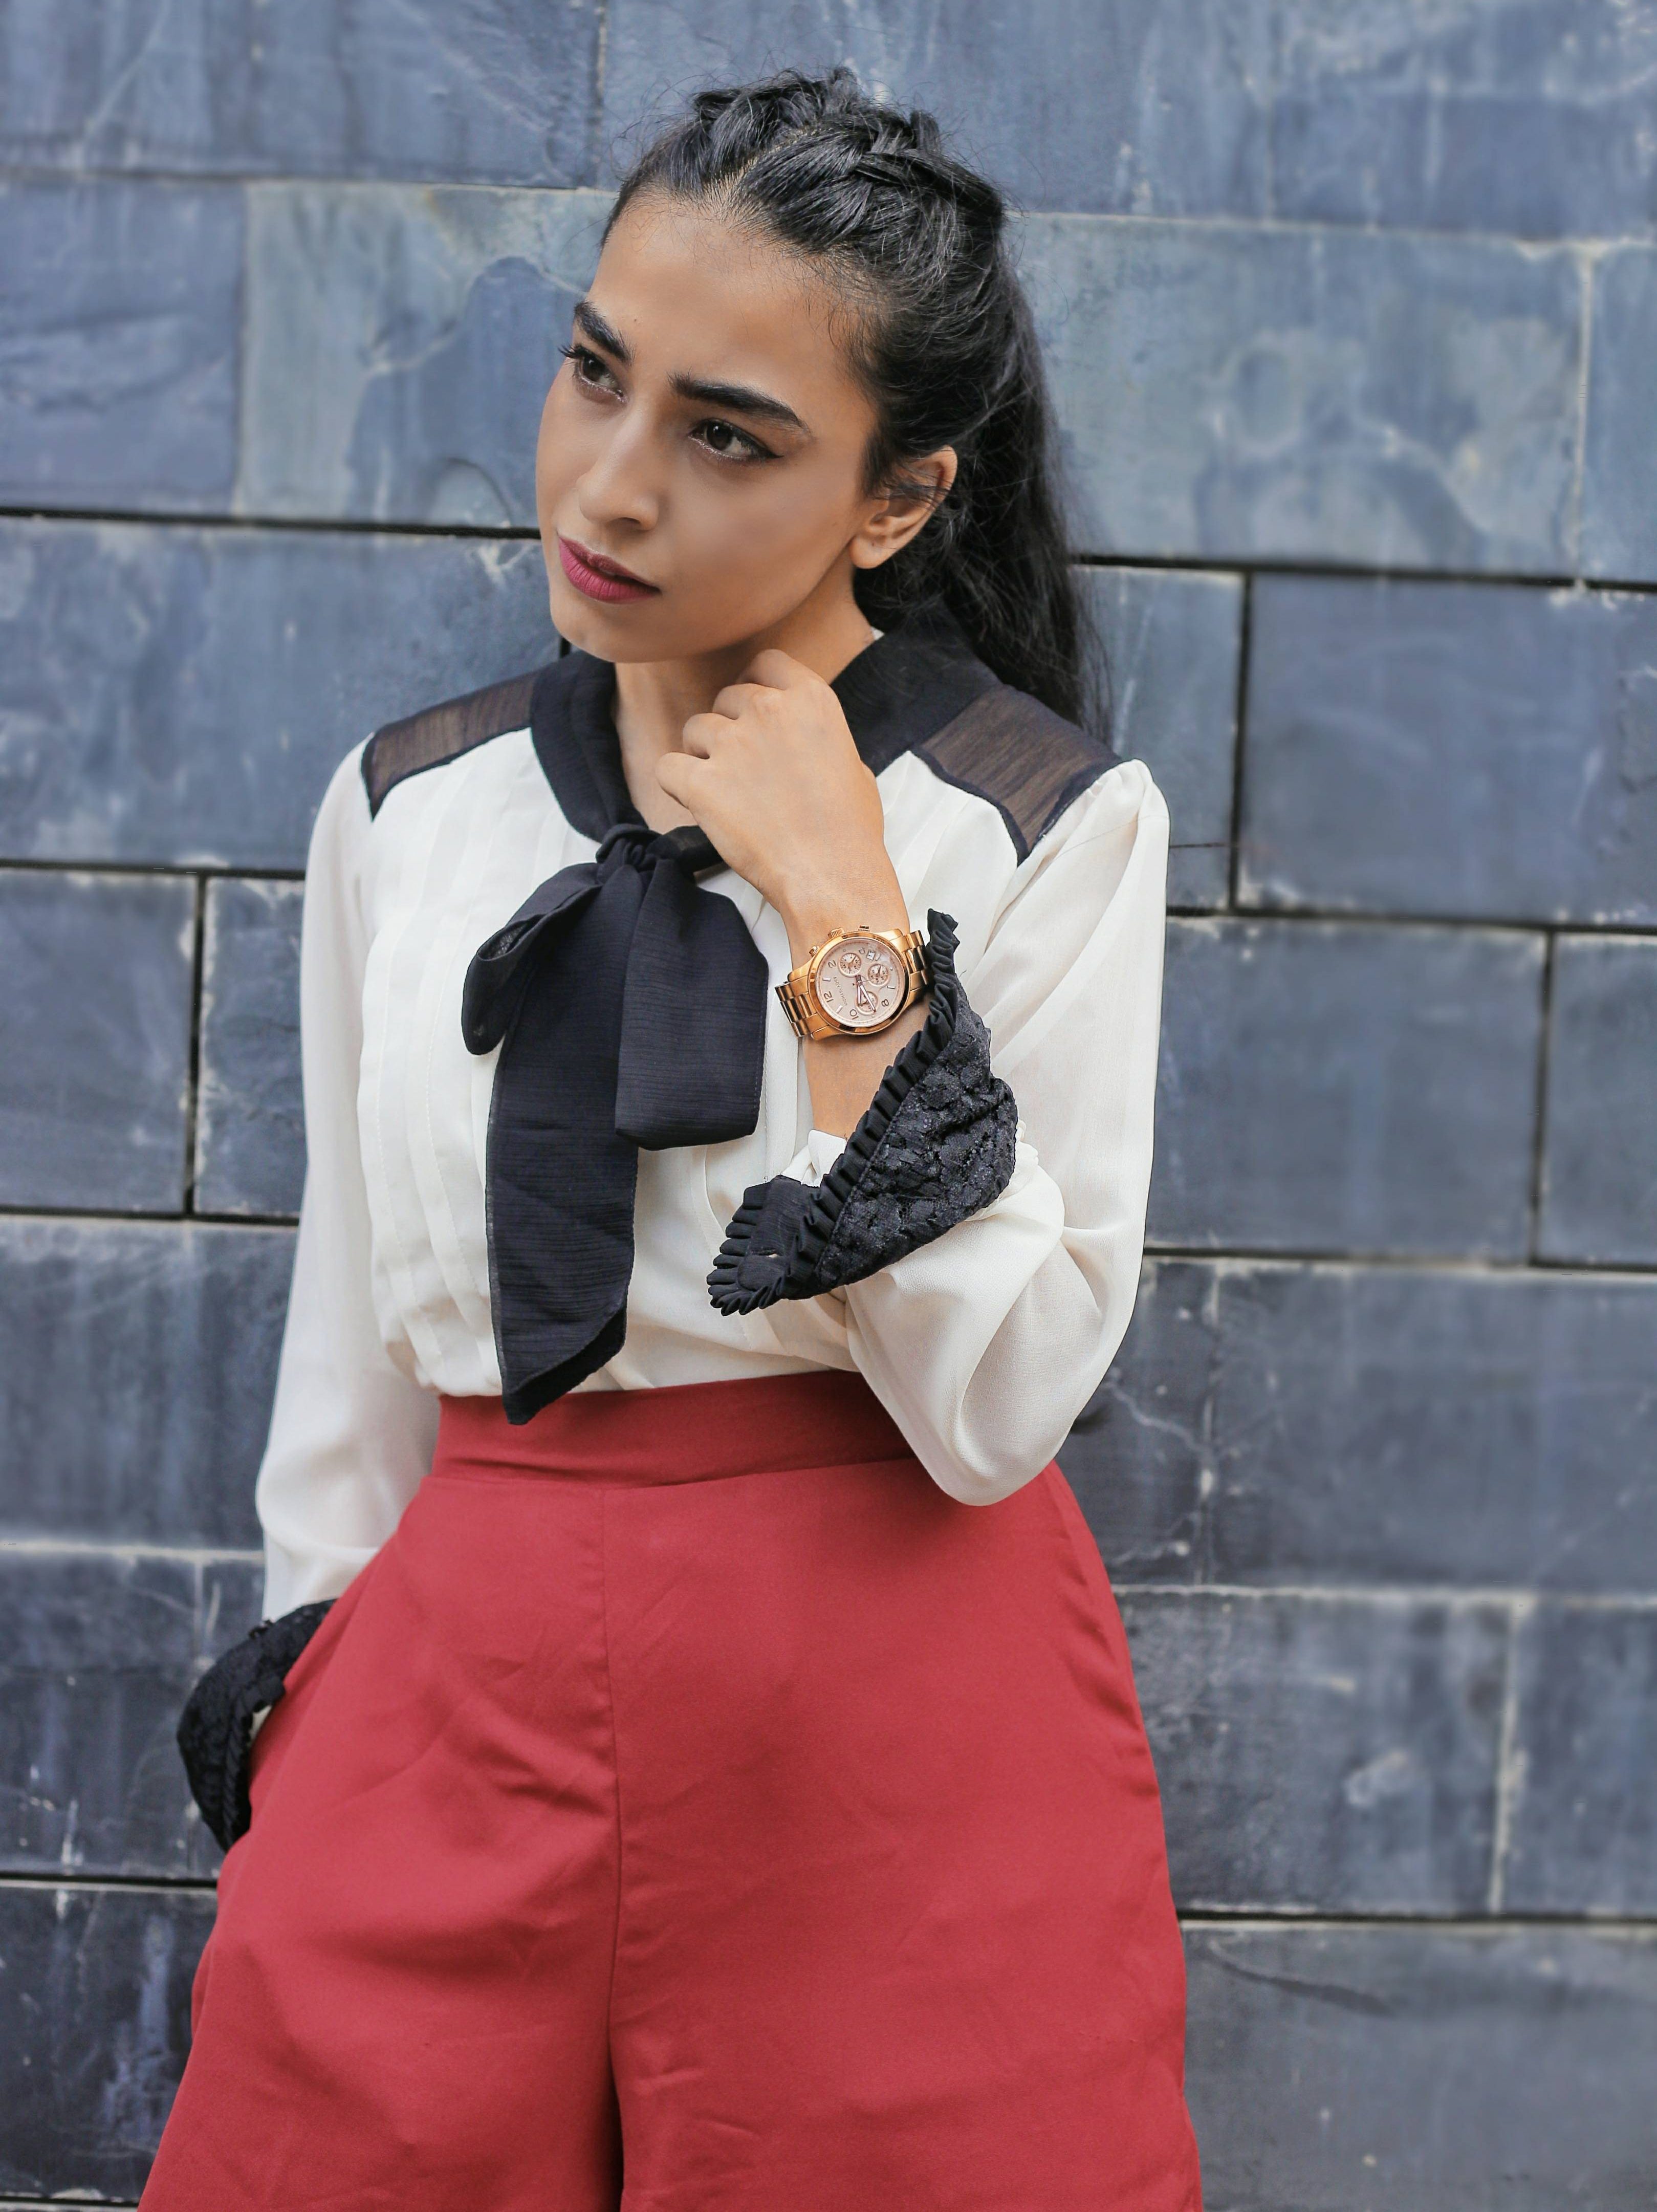 culottes, rust pants, red pants, work look, formal look, office look, work style inspo, officewear, friday dressing, miss chase india, street style